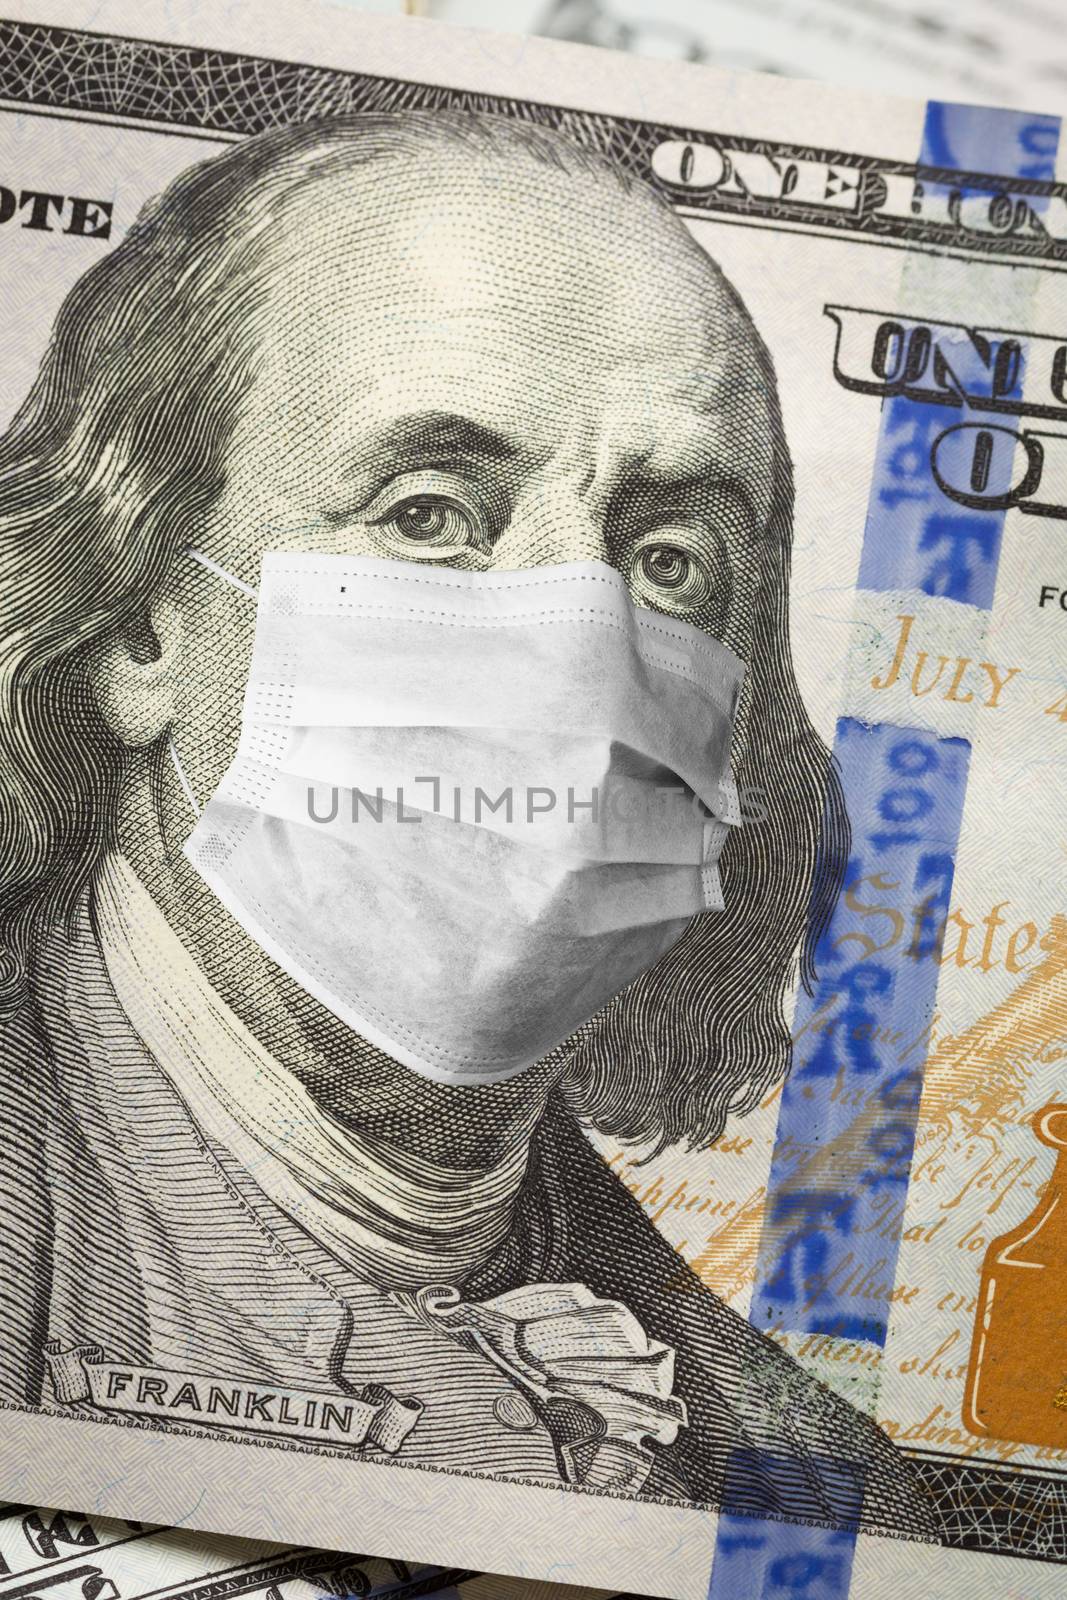 One Hundred Dollar Bill With Medical Face Mask on Face of Benjamin Franklin. by Feverpitched